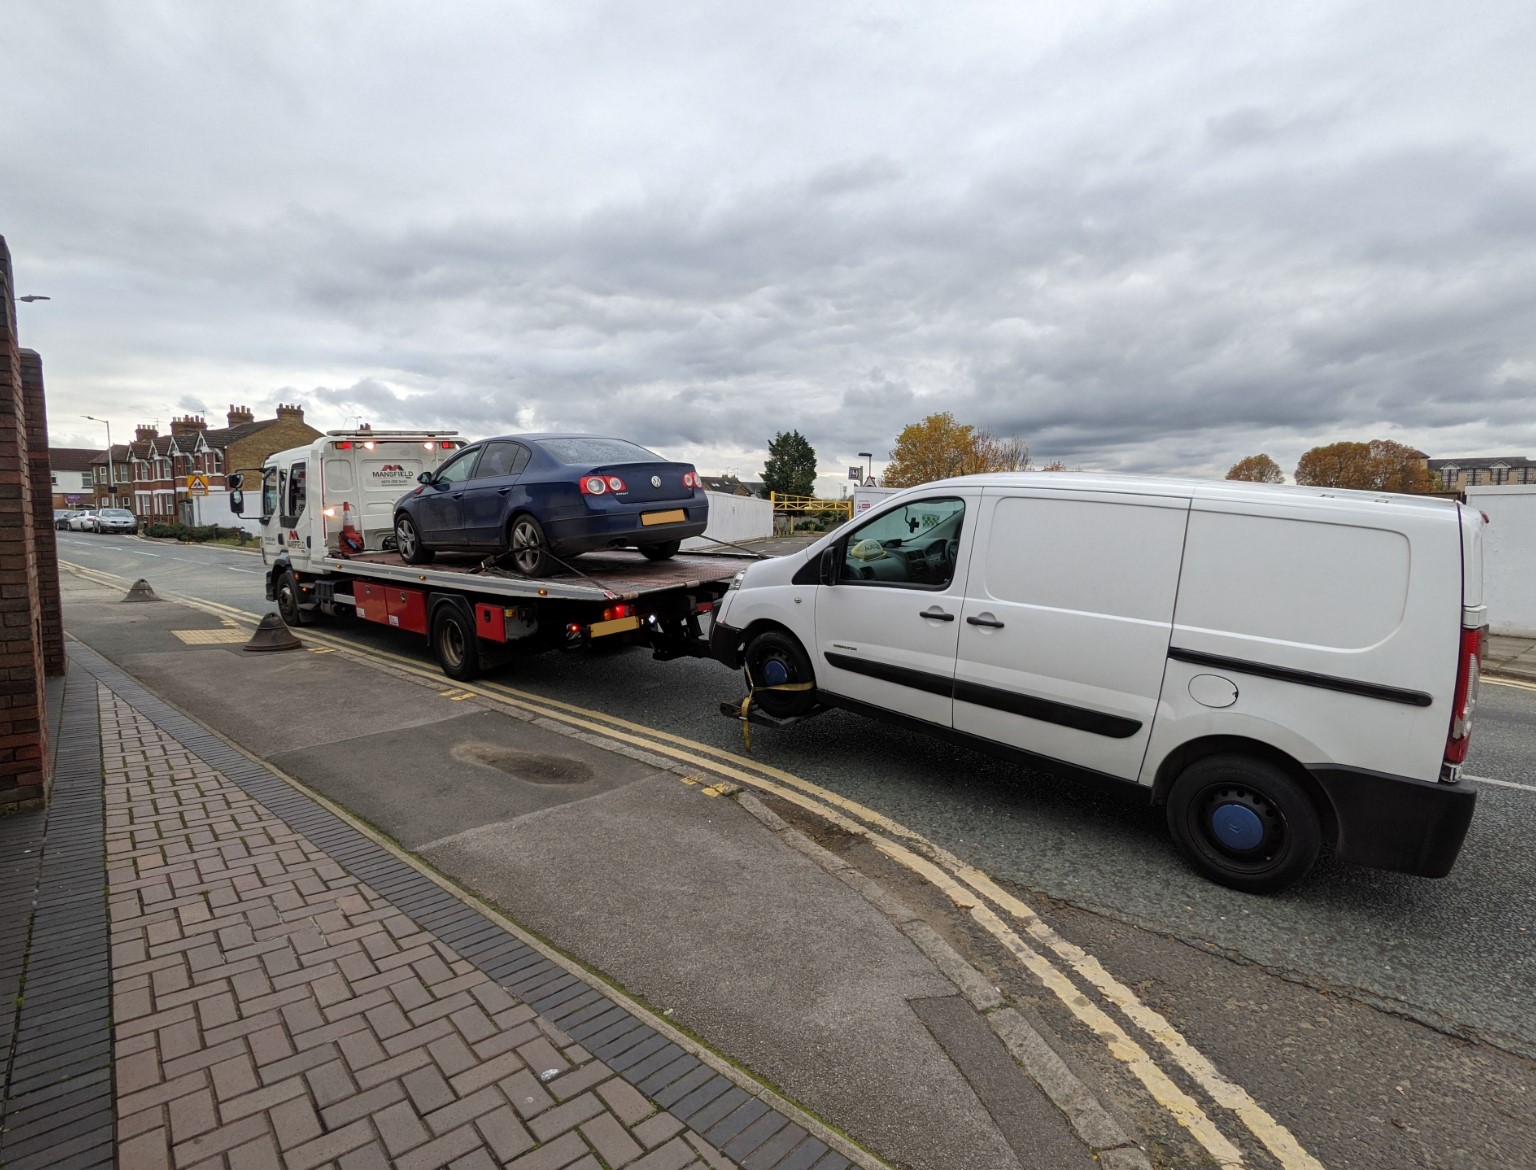 A tow truck loading on a car and a van which have been seized by police.